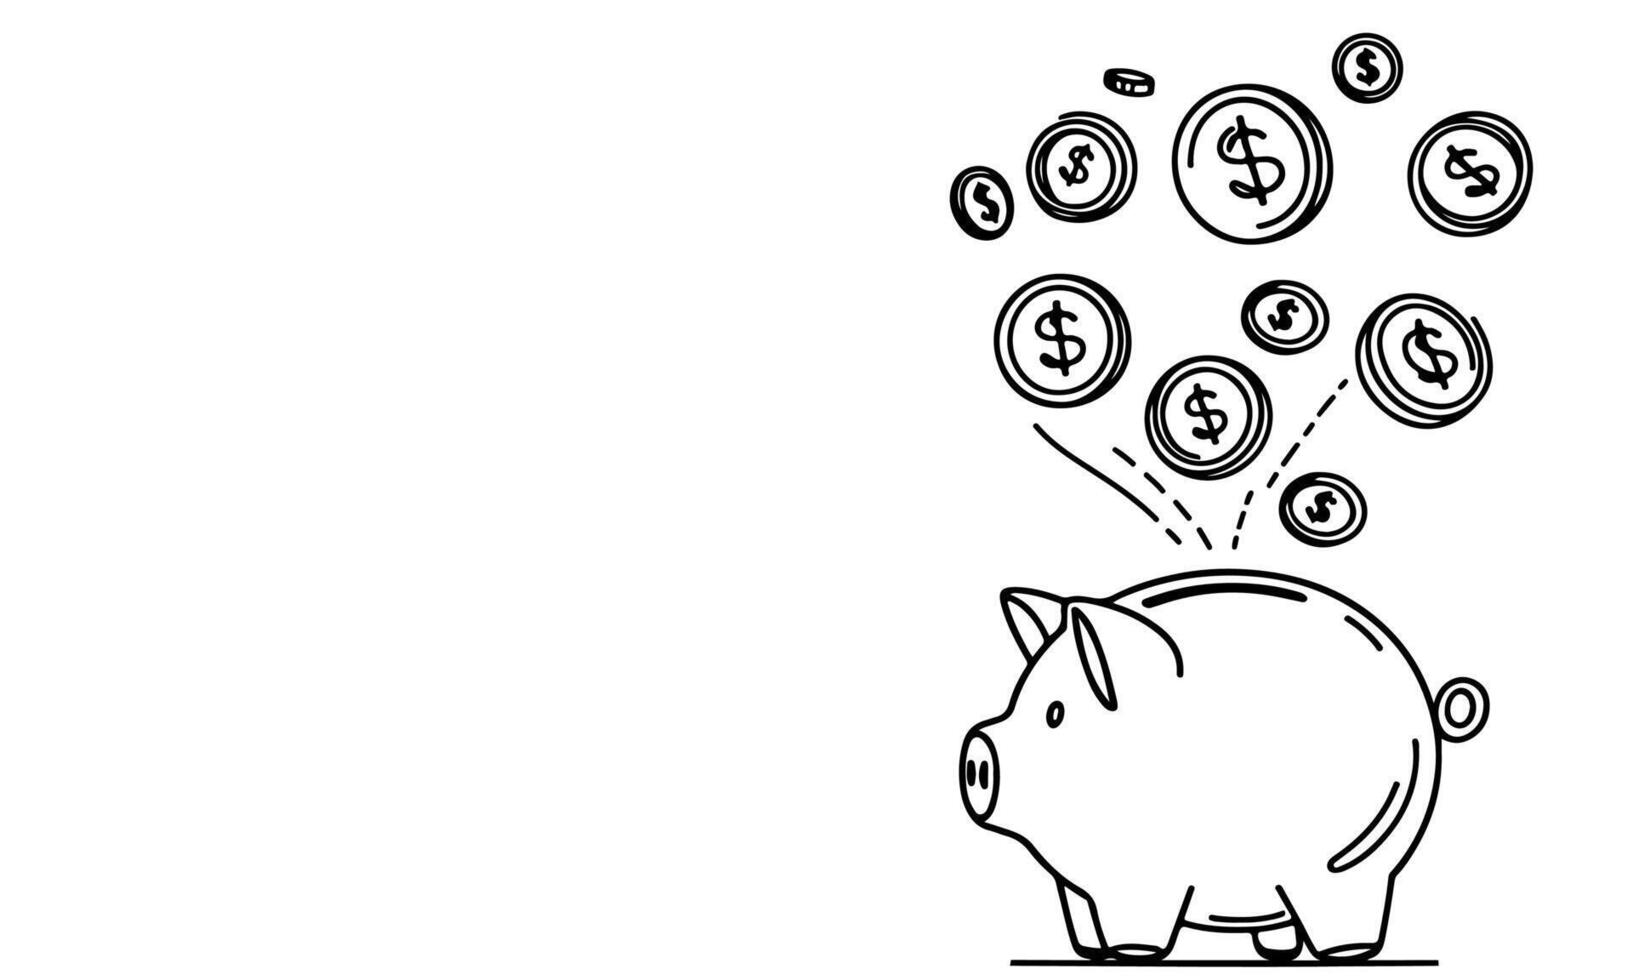 continuous one black line coins falling in Piggy bank doodle style vector illustration on white background